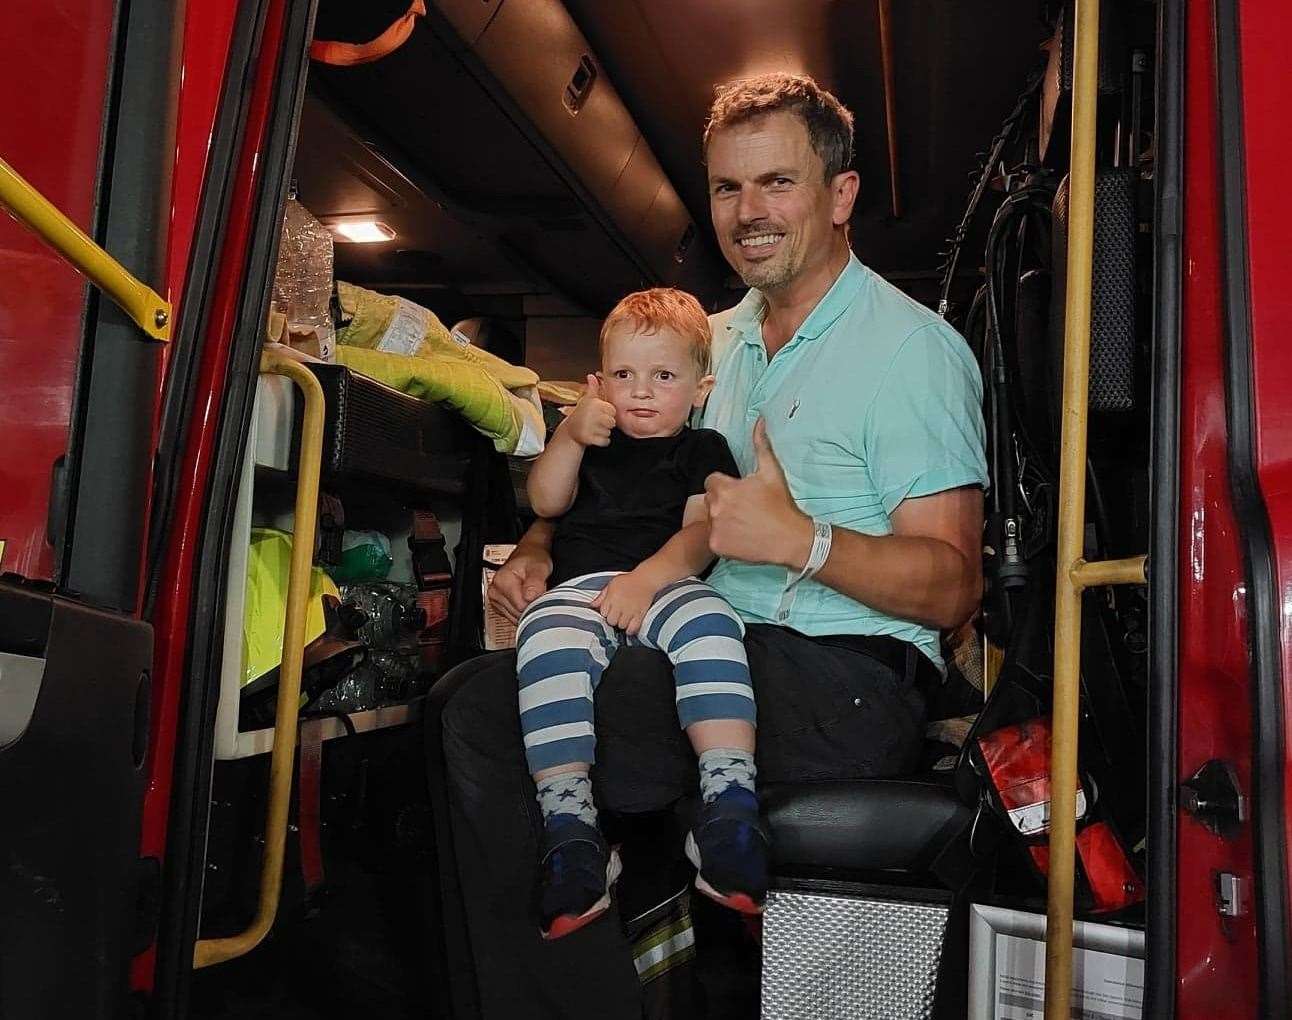 As Noah was so brave, the crew let him have a look around their fire engine in the hospital car park